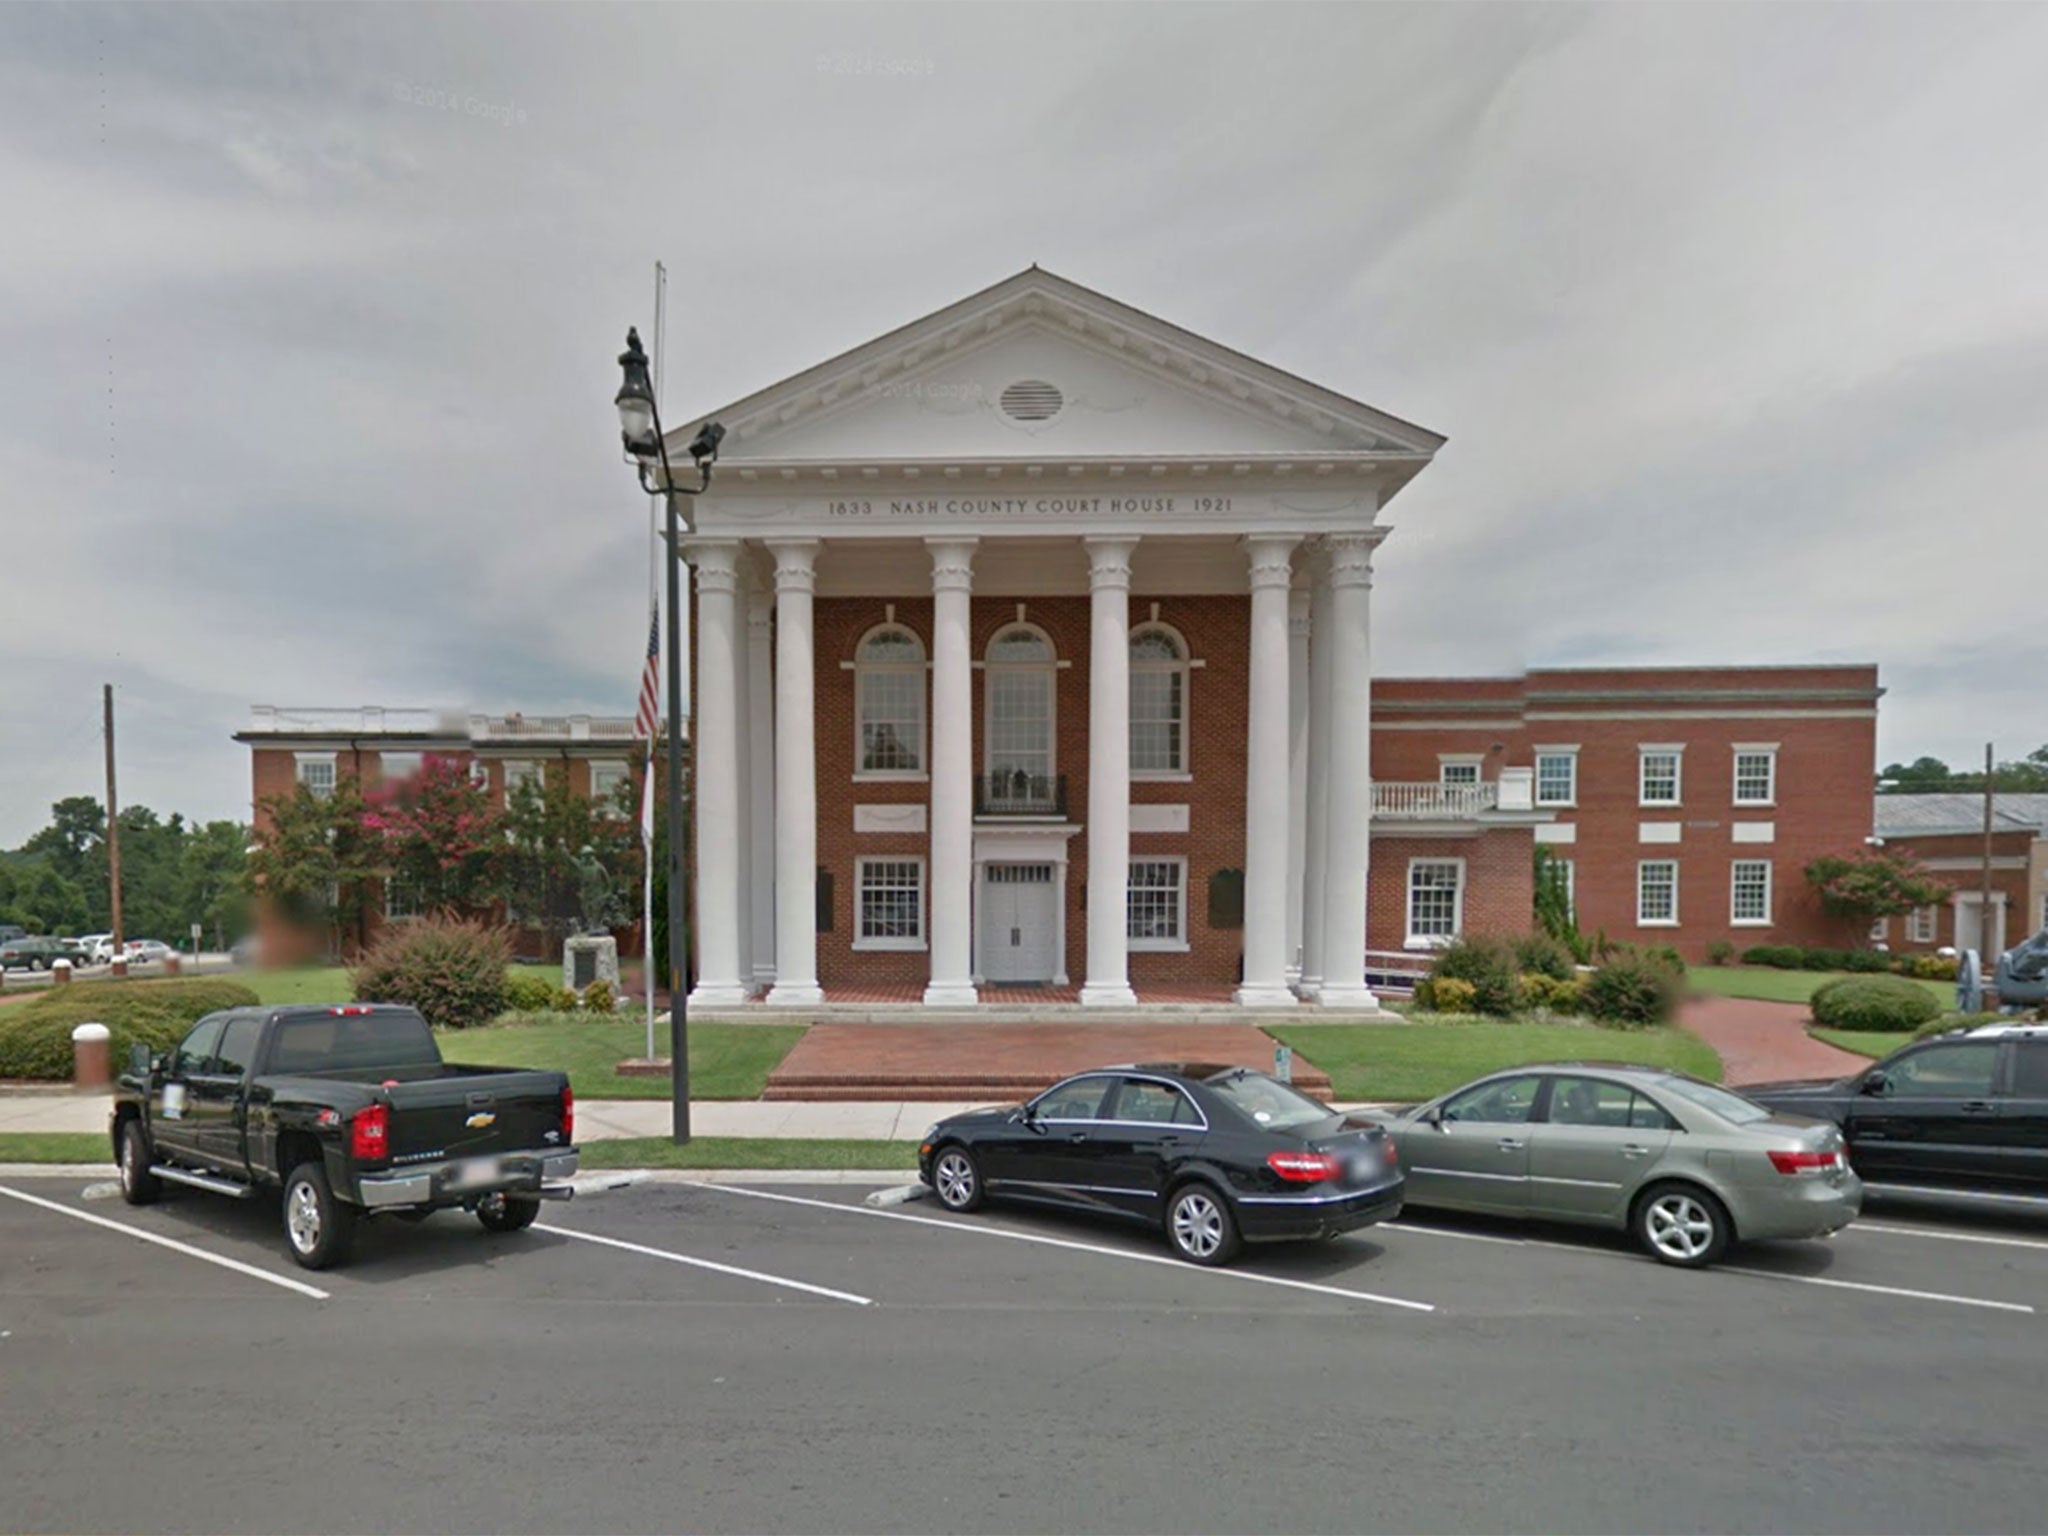 Nash Count Courthouse in North Carolina, where two people were shot on Tuesday